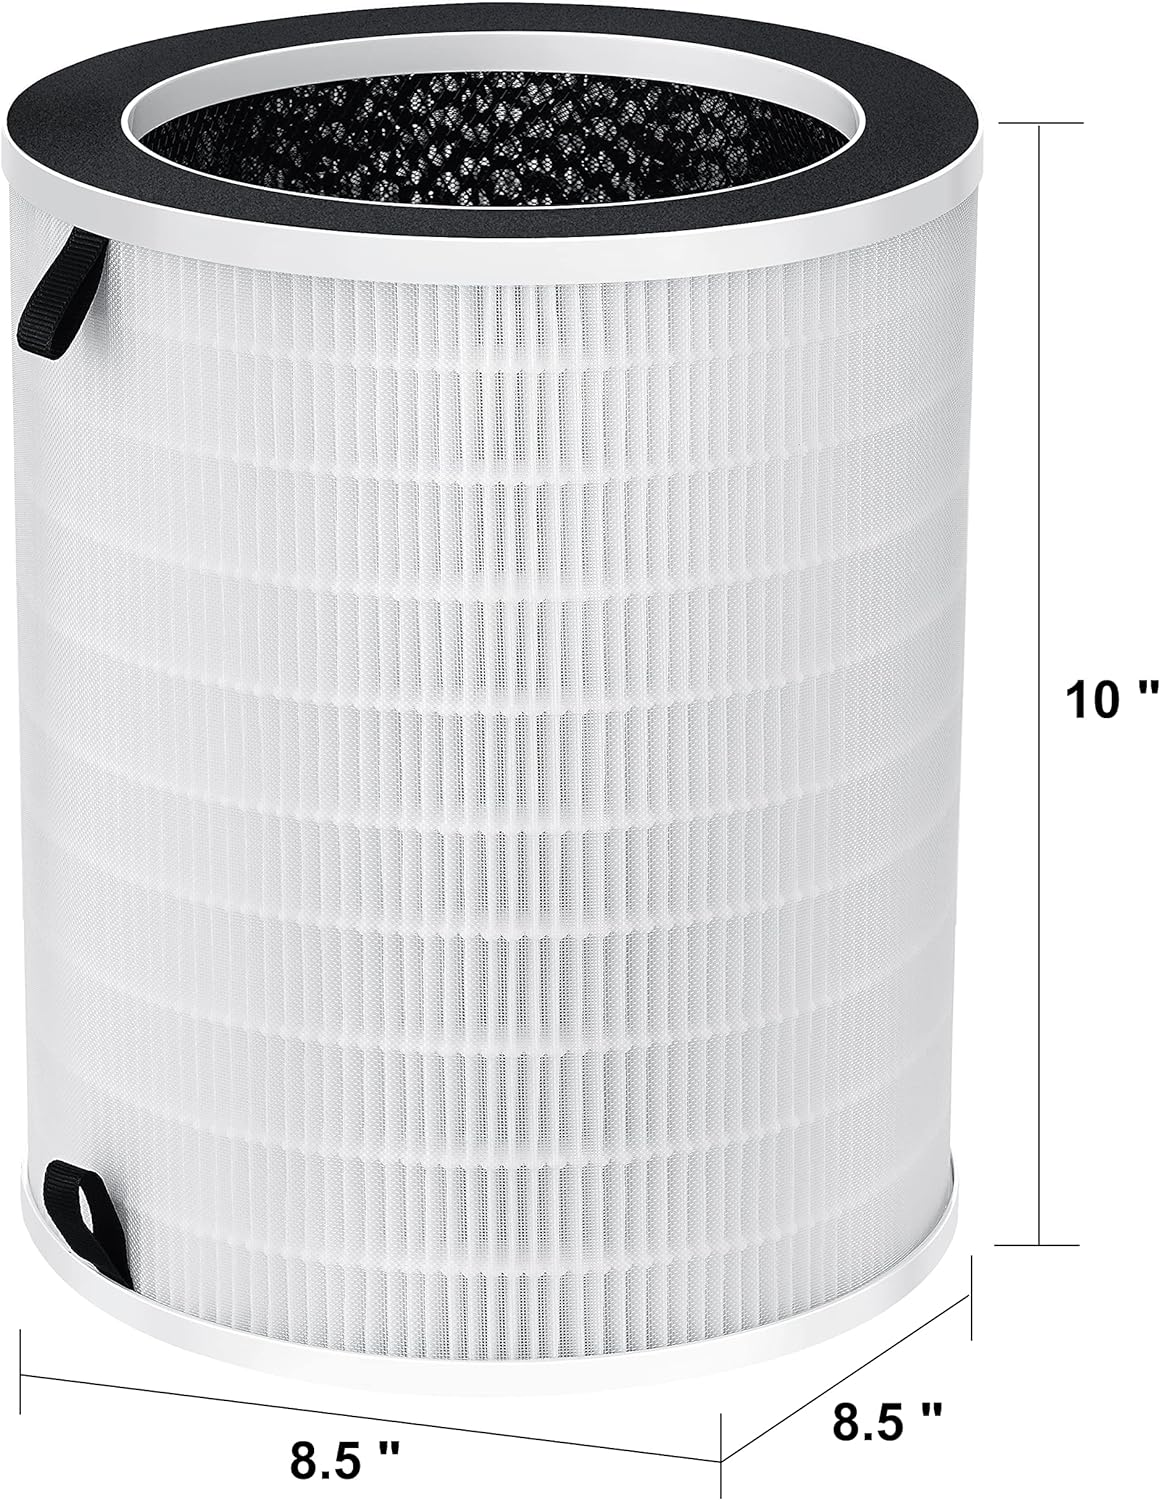 Galanz Pro Air Purifier Replacement Filter, H13 HEPA with High Grade Granular Activated Carbon Filter, 3-Stage Filtration for Dust, Pet Odors, Pollen, Smoke, Pollution, White